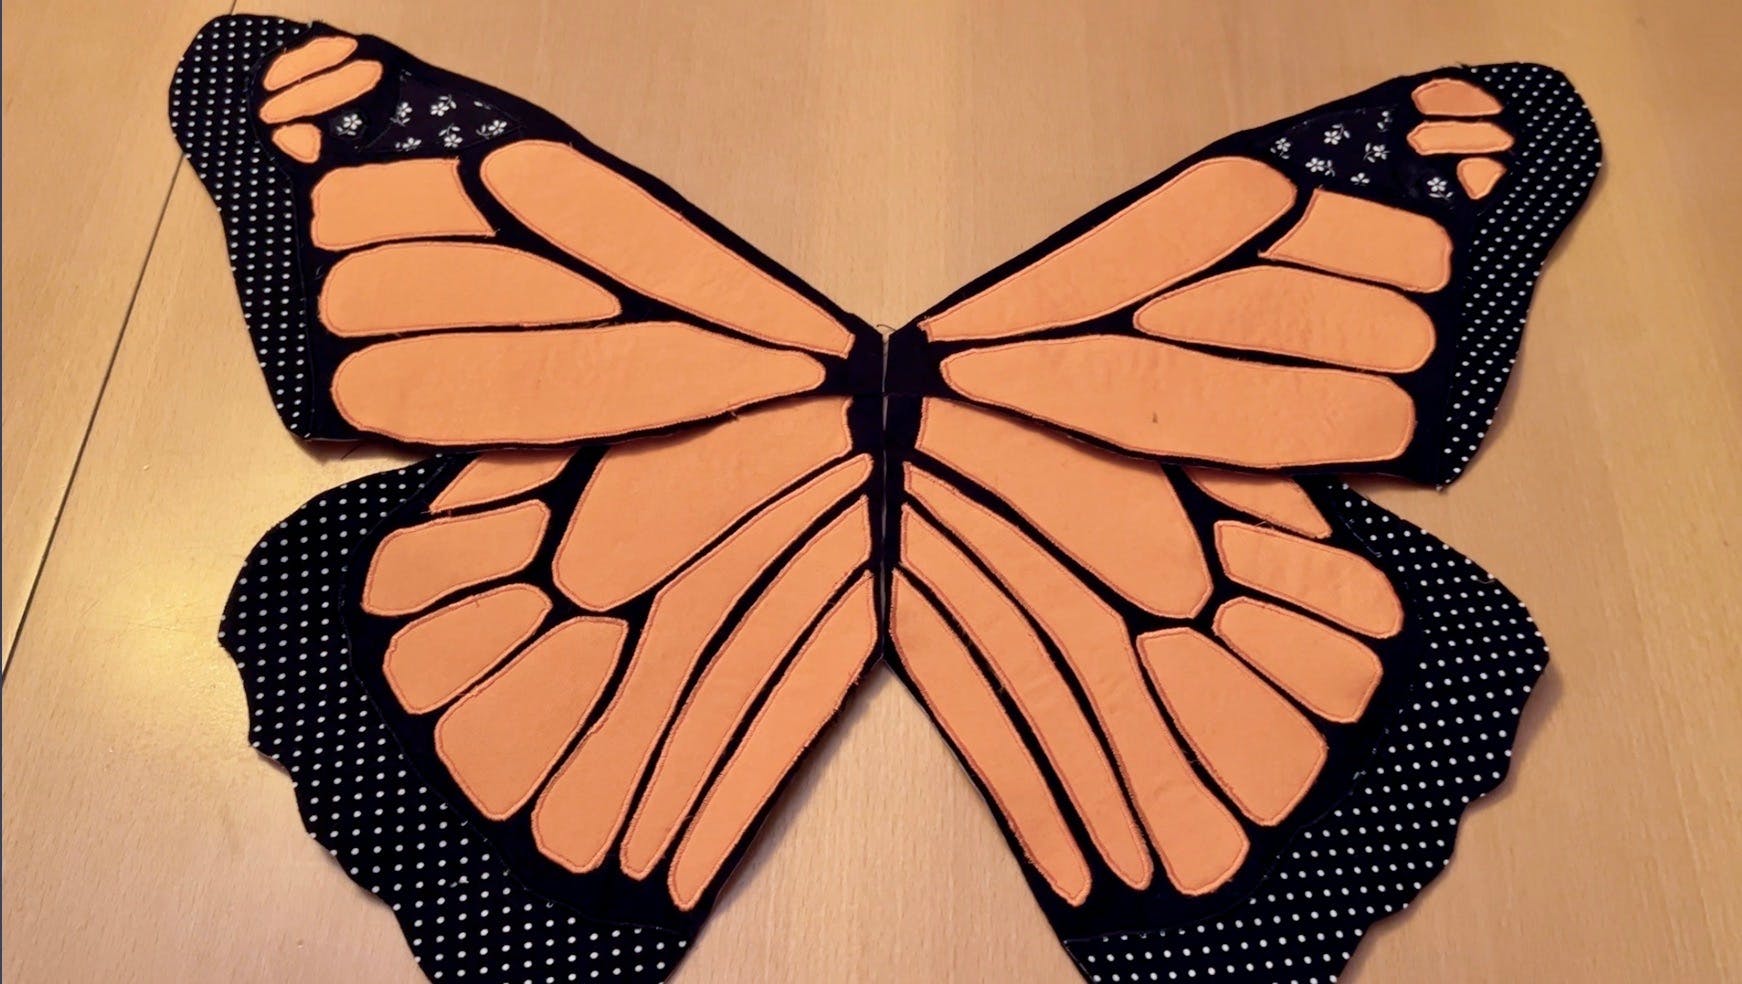 The completed butterfly.